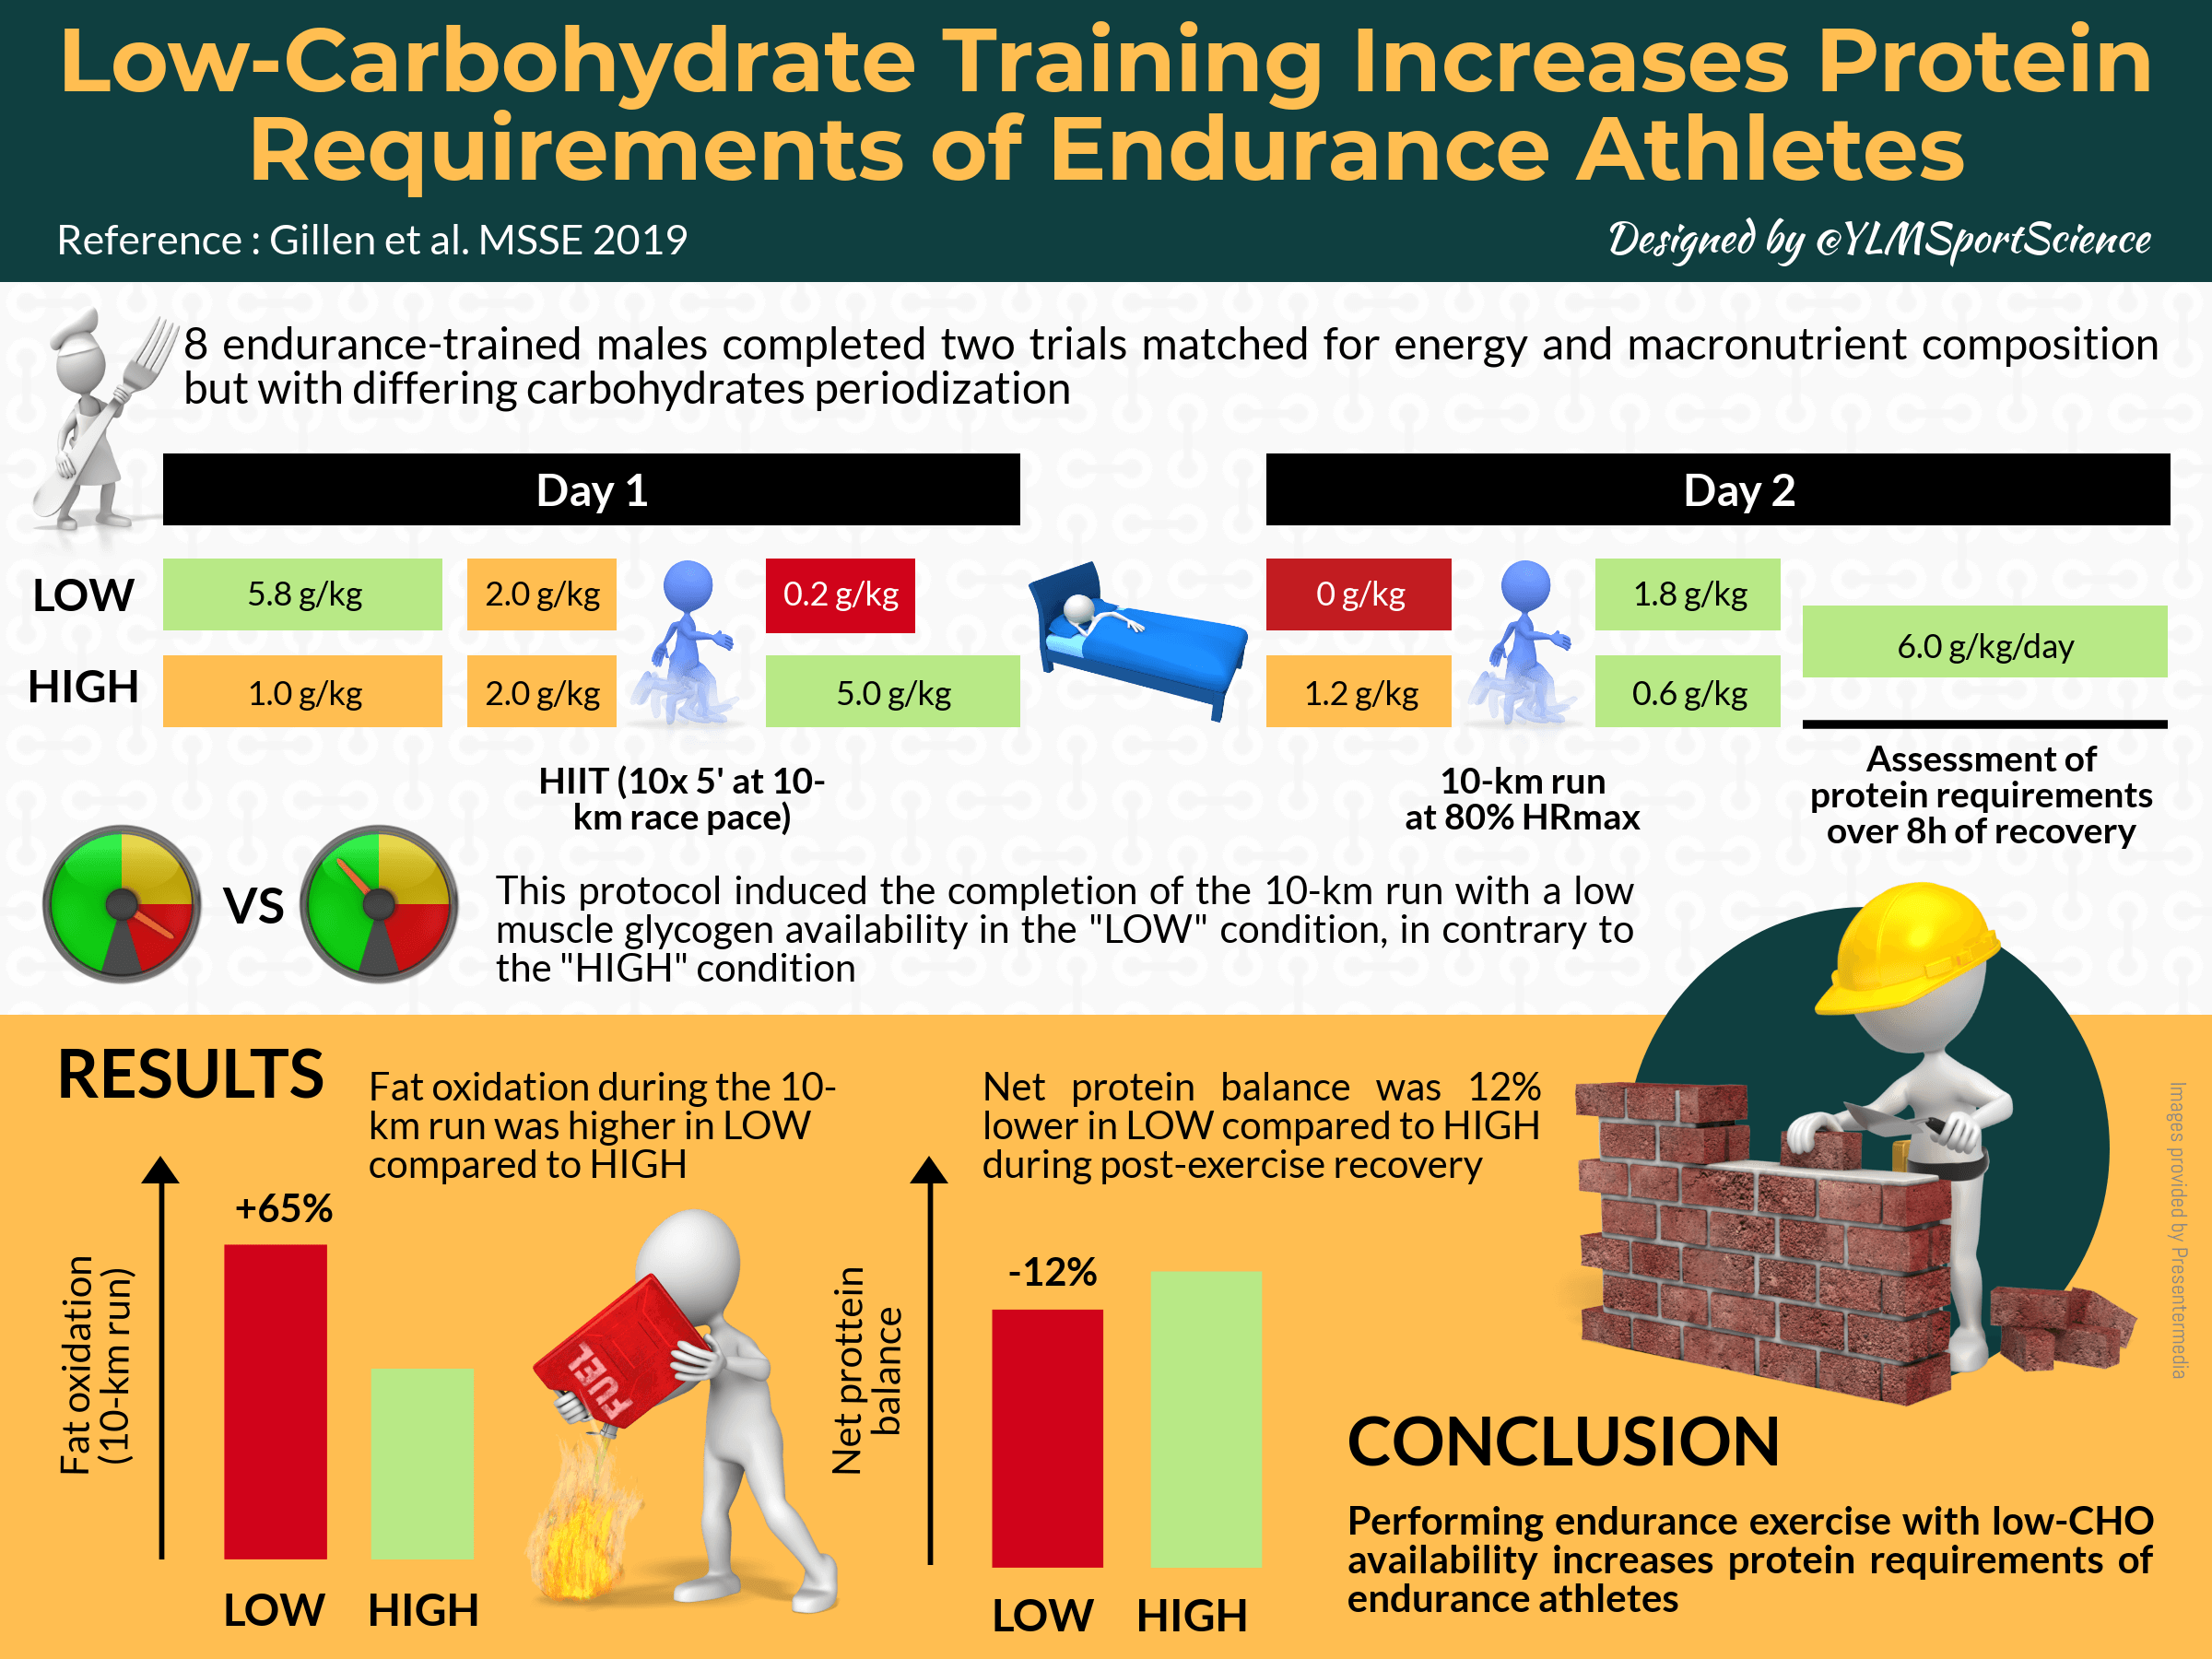 Training Increases Protein Requirements of Endurance Athletes YLMSportScience